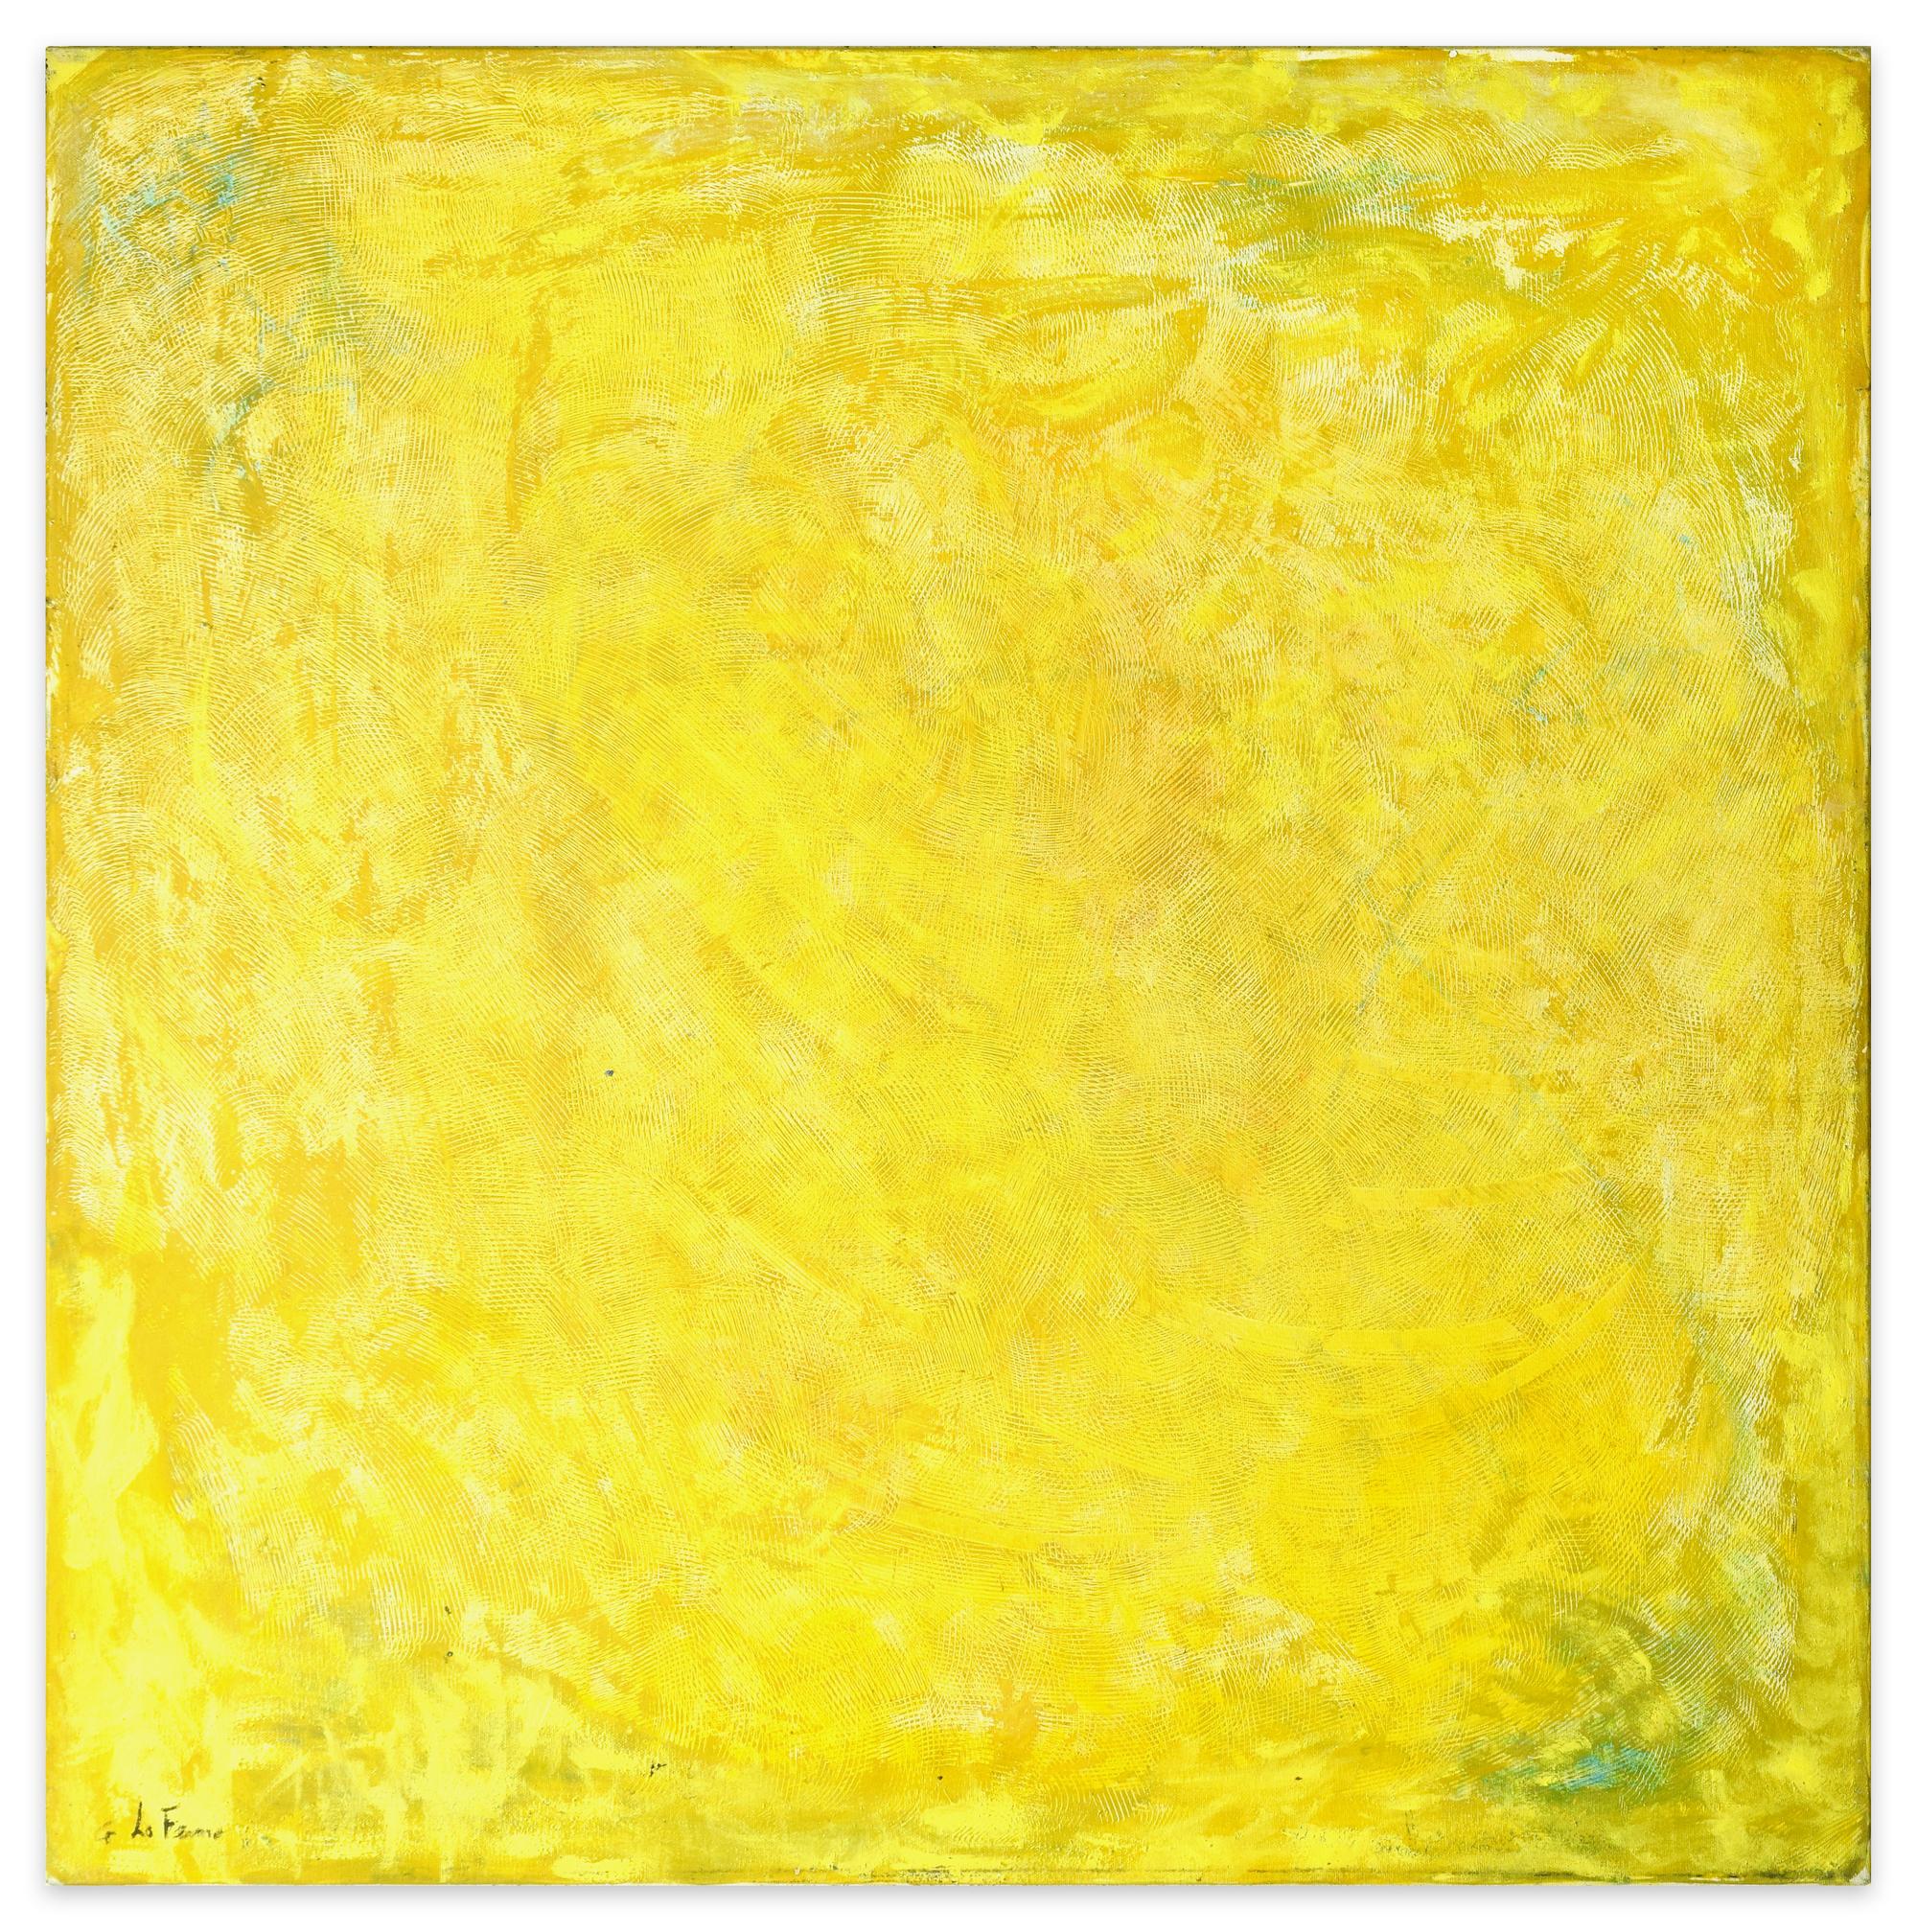 L'Infinito is an original oil painting on canvas, realized in 2014 by the Italian artist Giorgio Lo Fermo.

Hand-signed on the lower left margin.

Of square format, this is an amazing contemporary artwork done by pure color: a splendid lemon yellow